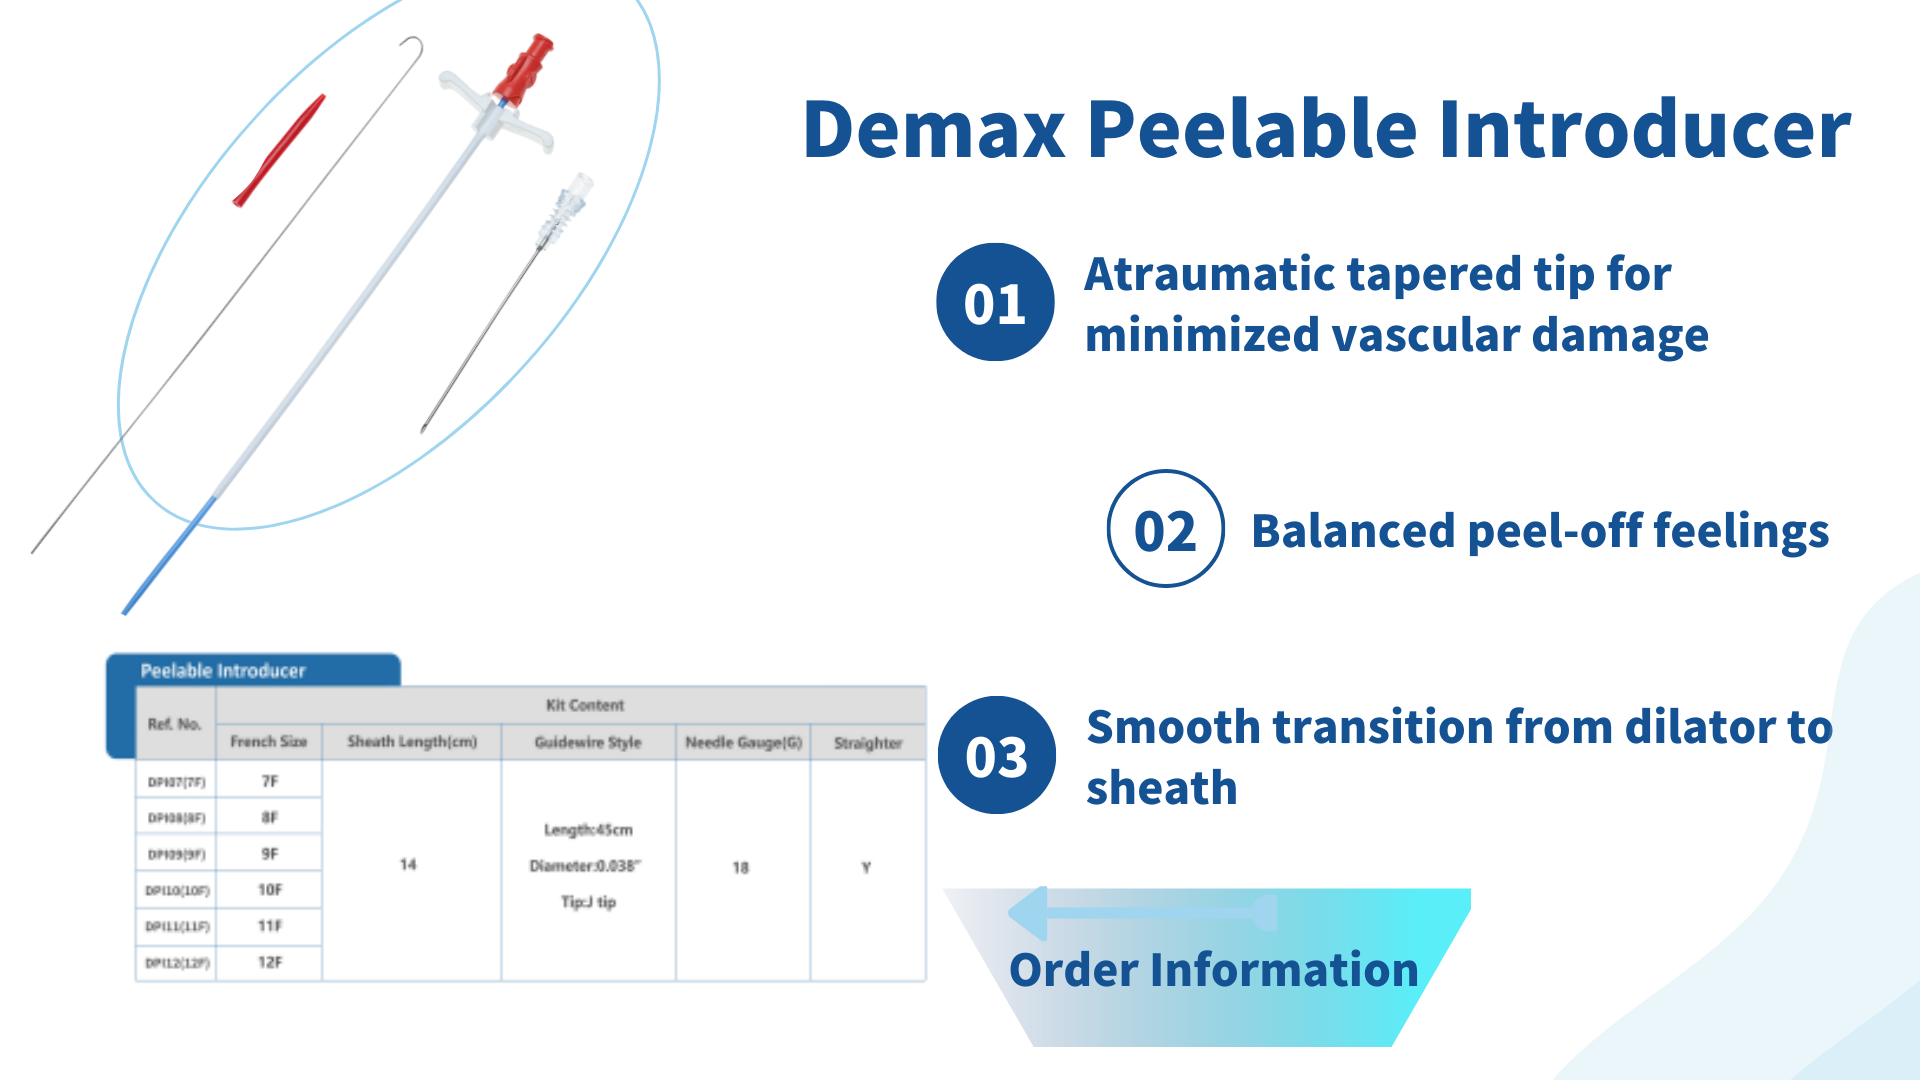 Demax Peelable Introducer Virtual Lecture-Asia & Europe Station